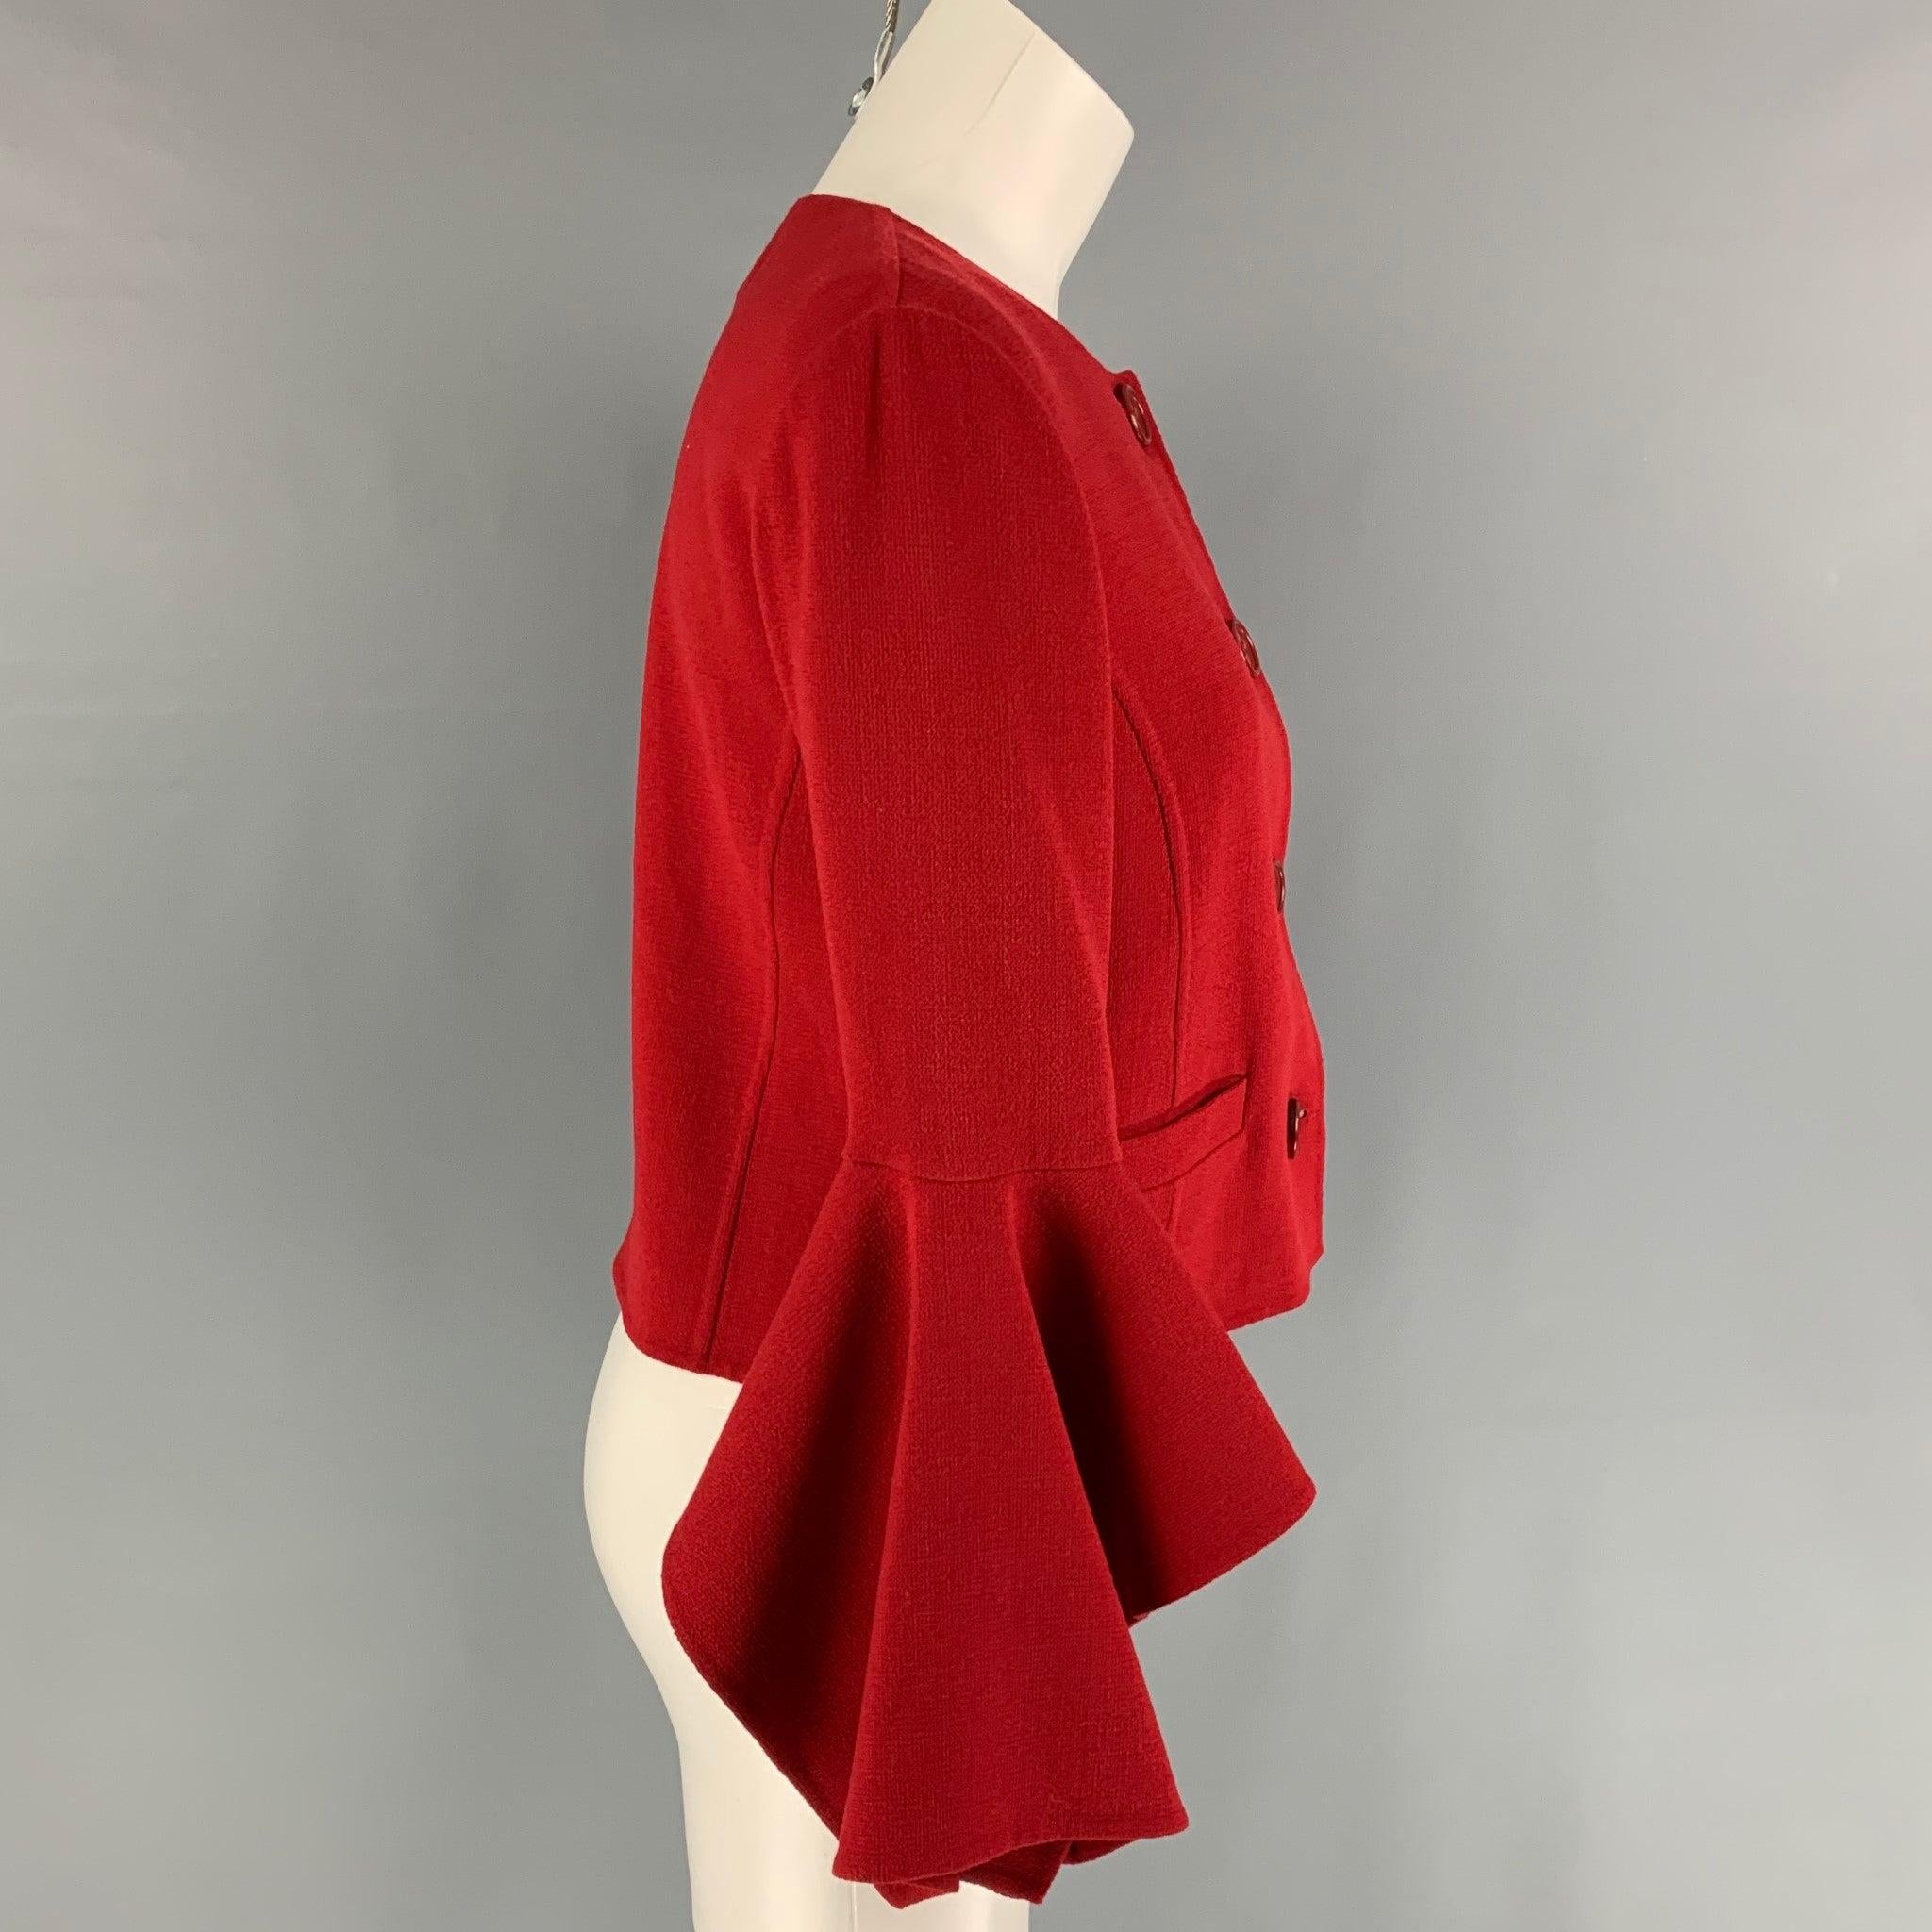 OSCAR DE LA RENTA coat comes in a red virgin wool featuring a cropped style, ruffled sleeves, slit pockets, and a buttoned closure. Matching dress sold separately. Made in Italy.
New With Tags.
 

Marked:   4 

Measurements: 
 
Shoulder: 16 inches 